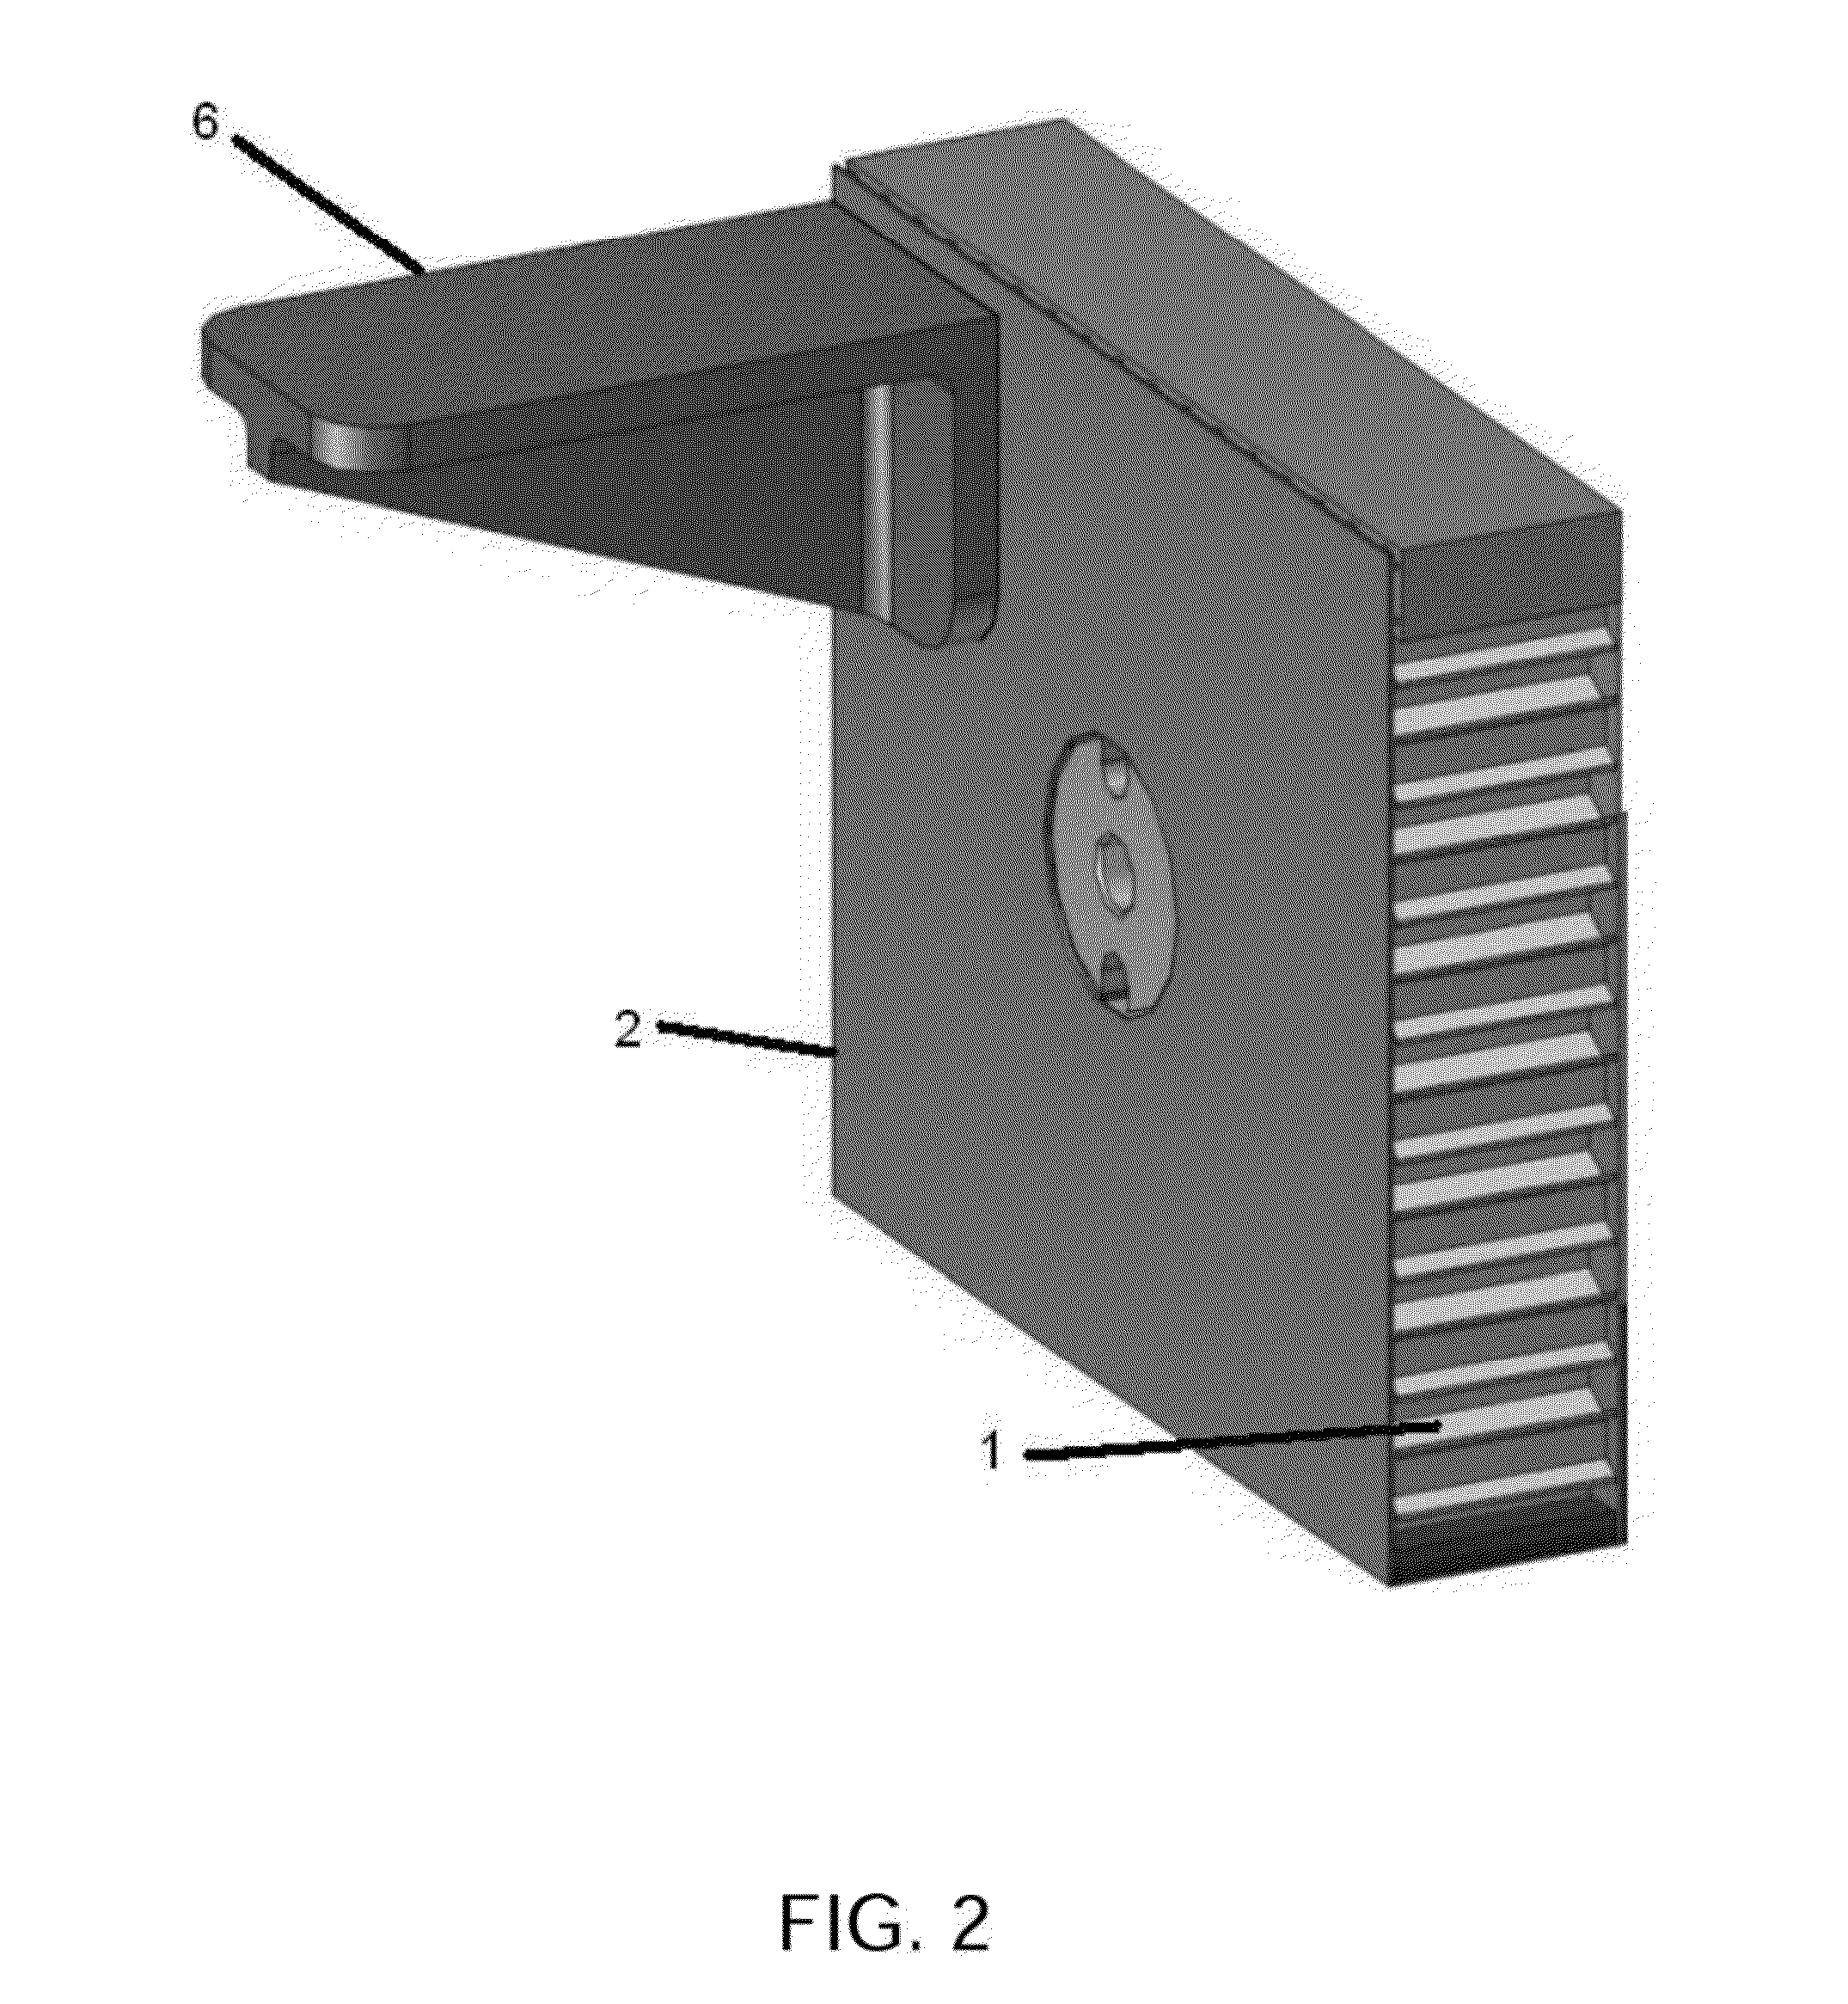 Method and apparatus for forming and adhering panel and bracket structures